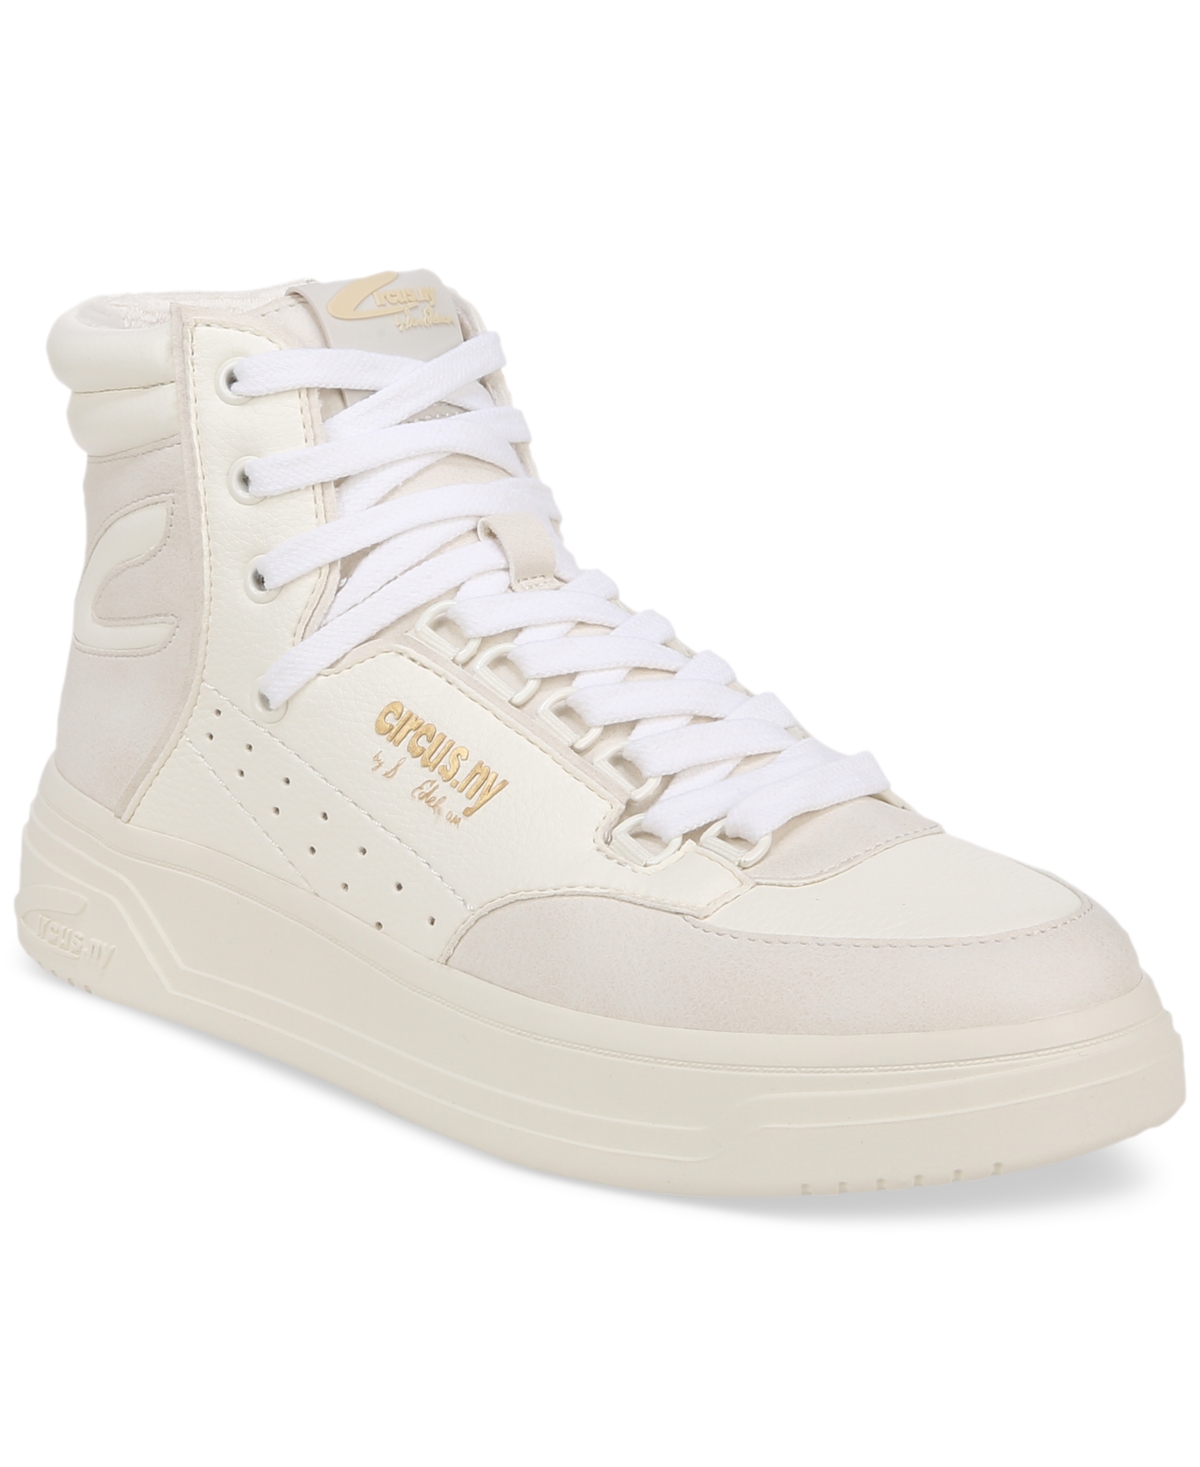 Irving Lace-Up High-Top Sneakers - White/Off White